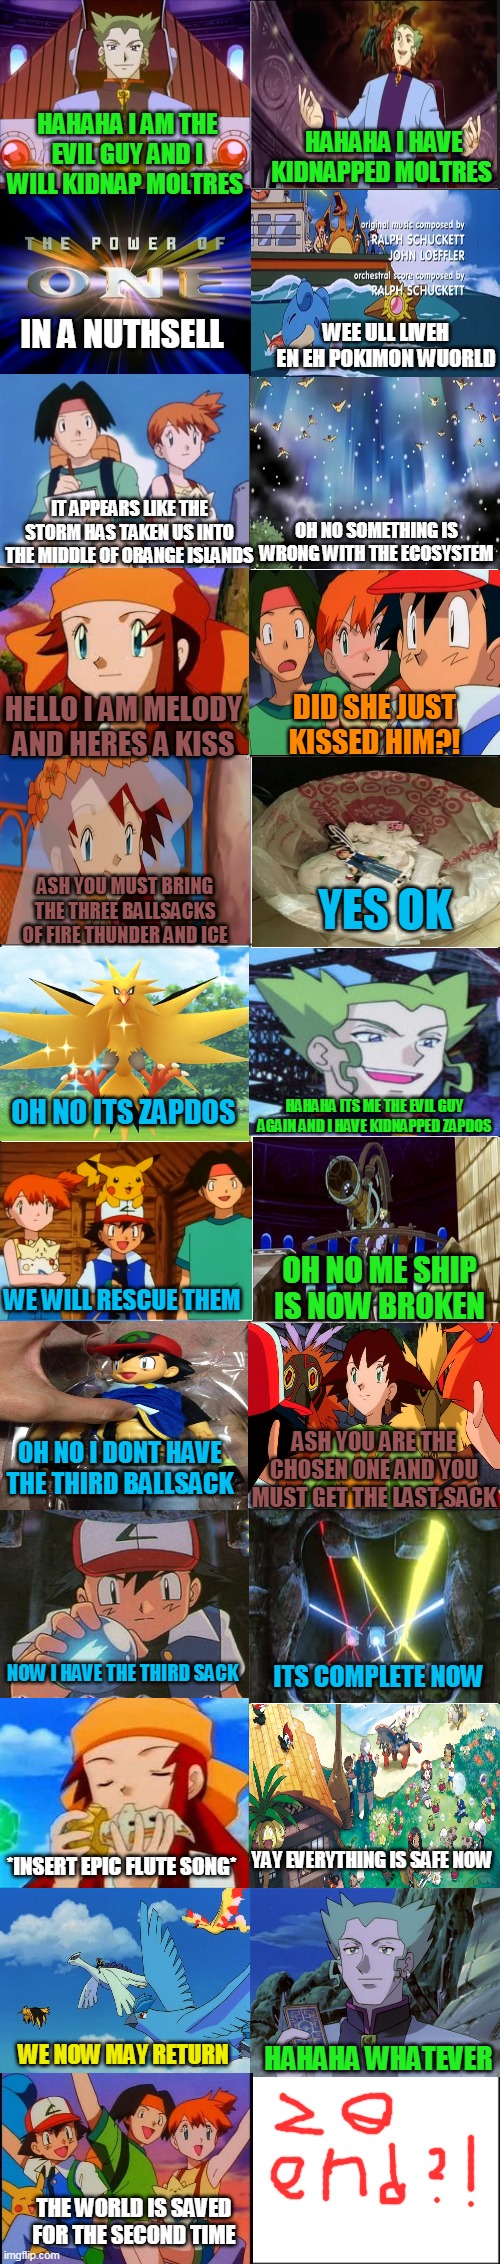 pokemon movie 2000 in a nutshell | HAHAHA I HAVE KIDNAPPED MOLTRES; HAHAHA I AM THE EVIL GUY AND I WILL KIDNAP MOLTRES; IN A NUTHSELL; WEE ULL LIVEH EN EH POKIMON WUORLD; IT APPEARS LIKE THE STORM HAS TAKEN US INTO THE MIDDLE OF ORANGE ISLANDS; OH NO SOMETHING IS WRONG WITH THE ECOSYSTEM; HELLO I AM MELODY AND HERES A KISS; DID SHE JUST KISSED HIM?! YES OK; ASH YOU MUST BRING THE THREE BALLSACKS OF FIRE THUNDER AND ICE; OH NO ITS ZAPDOS; HAHAHA ITS ME THE EVIL GUY AGAIN AND I HAVE KIDNAPPED ZAPDOS; OH NO ME SHIP IS NOW BROKEN; WE WILL RESCUE THEM; ASH YOU ARE THE CHOSEN ONE AND YOU MUST GET THE LAST SACK; OH NO I DONT HAVE THE THIRD BALLSACK; ITS COMPLETE NOW; NOW I HAVE THE THIRD SACK; YAY EVERYTHING IS SAFE NOW; *INSERT EPIC FLUTE SONG*; HAHAHA WHATEVER; WE NOW MAY RETURN; THE WORLD IS SAVED FOR THE SECOND TIME | image tagged in eight panel rage comic maker,memes,funny,pokemon,in a nutshell | made w/ Imgflip meme maker